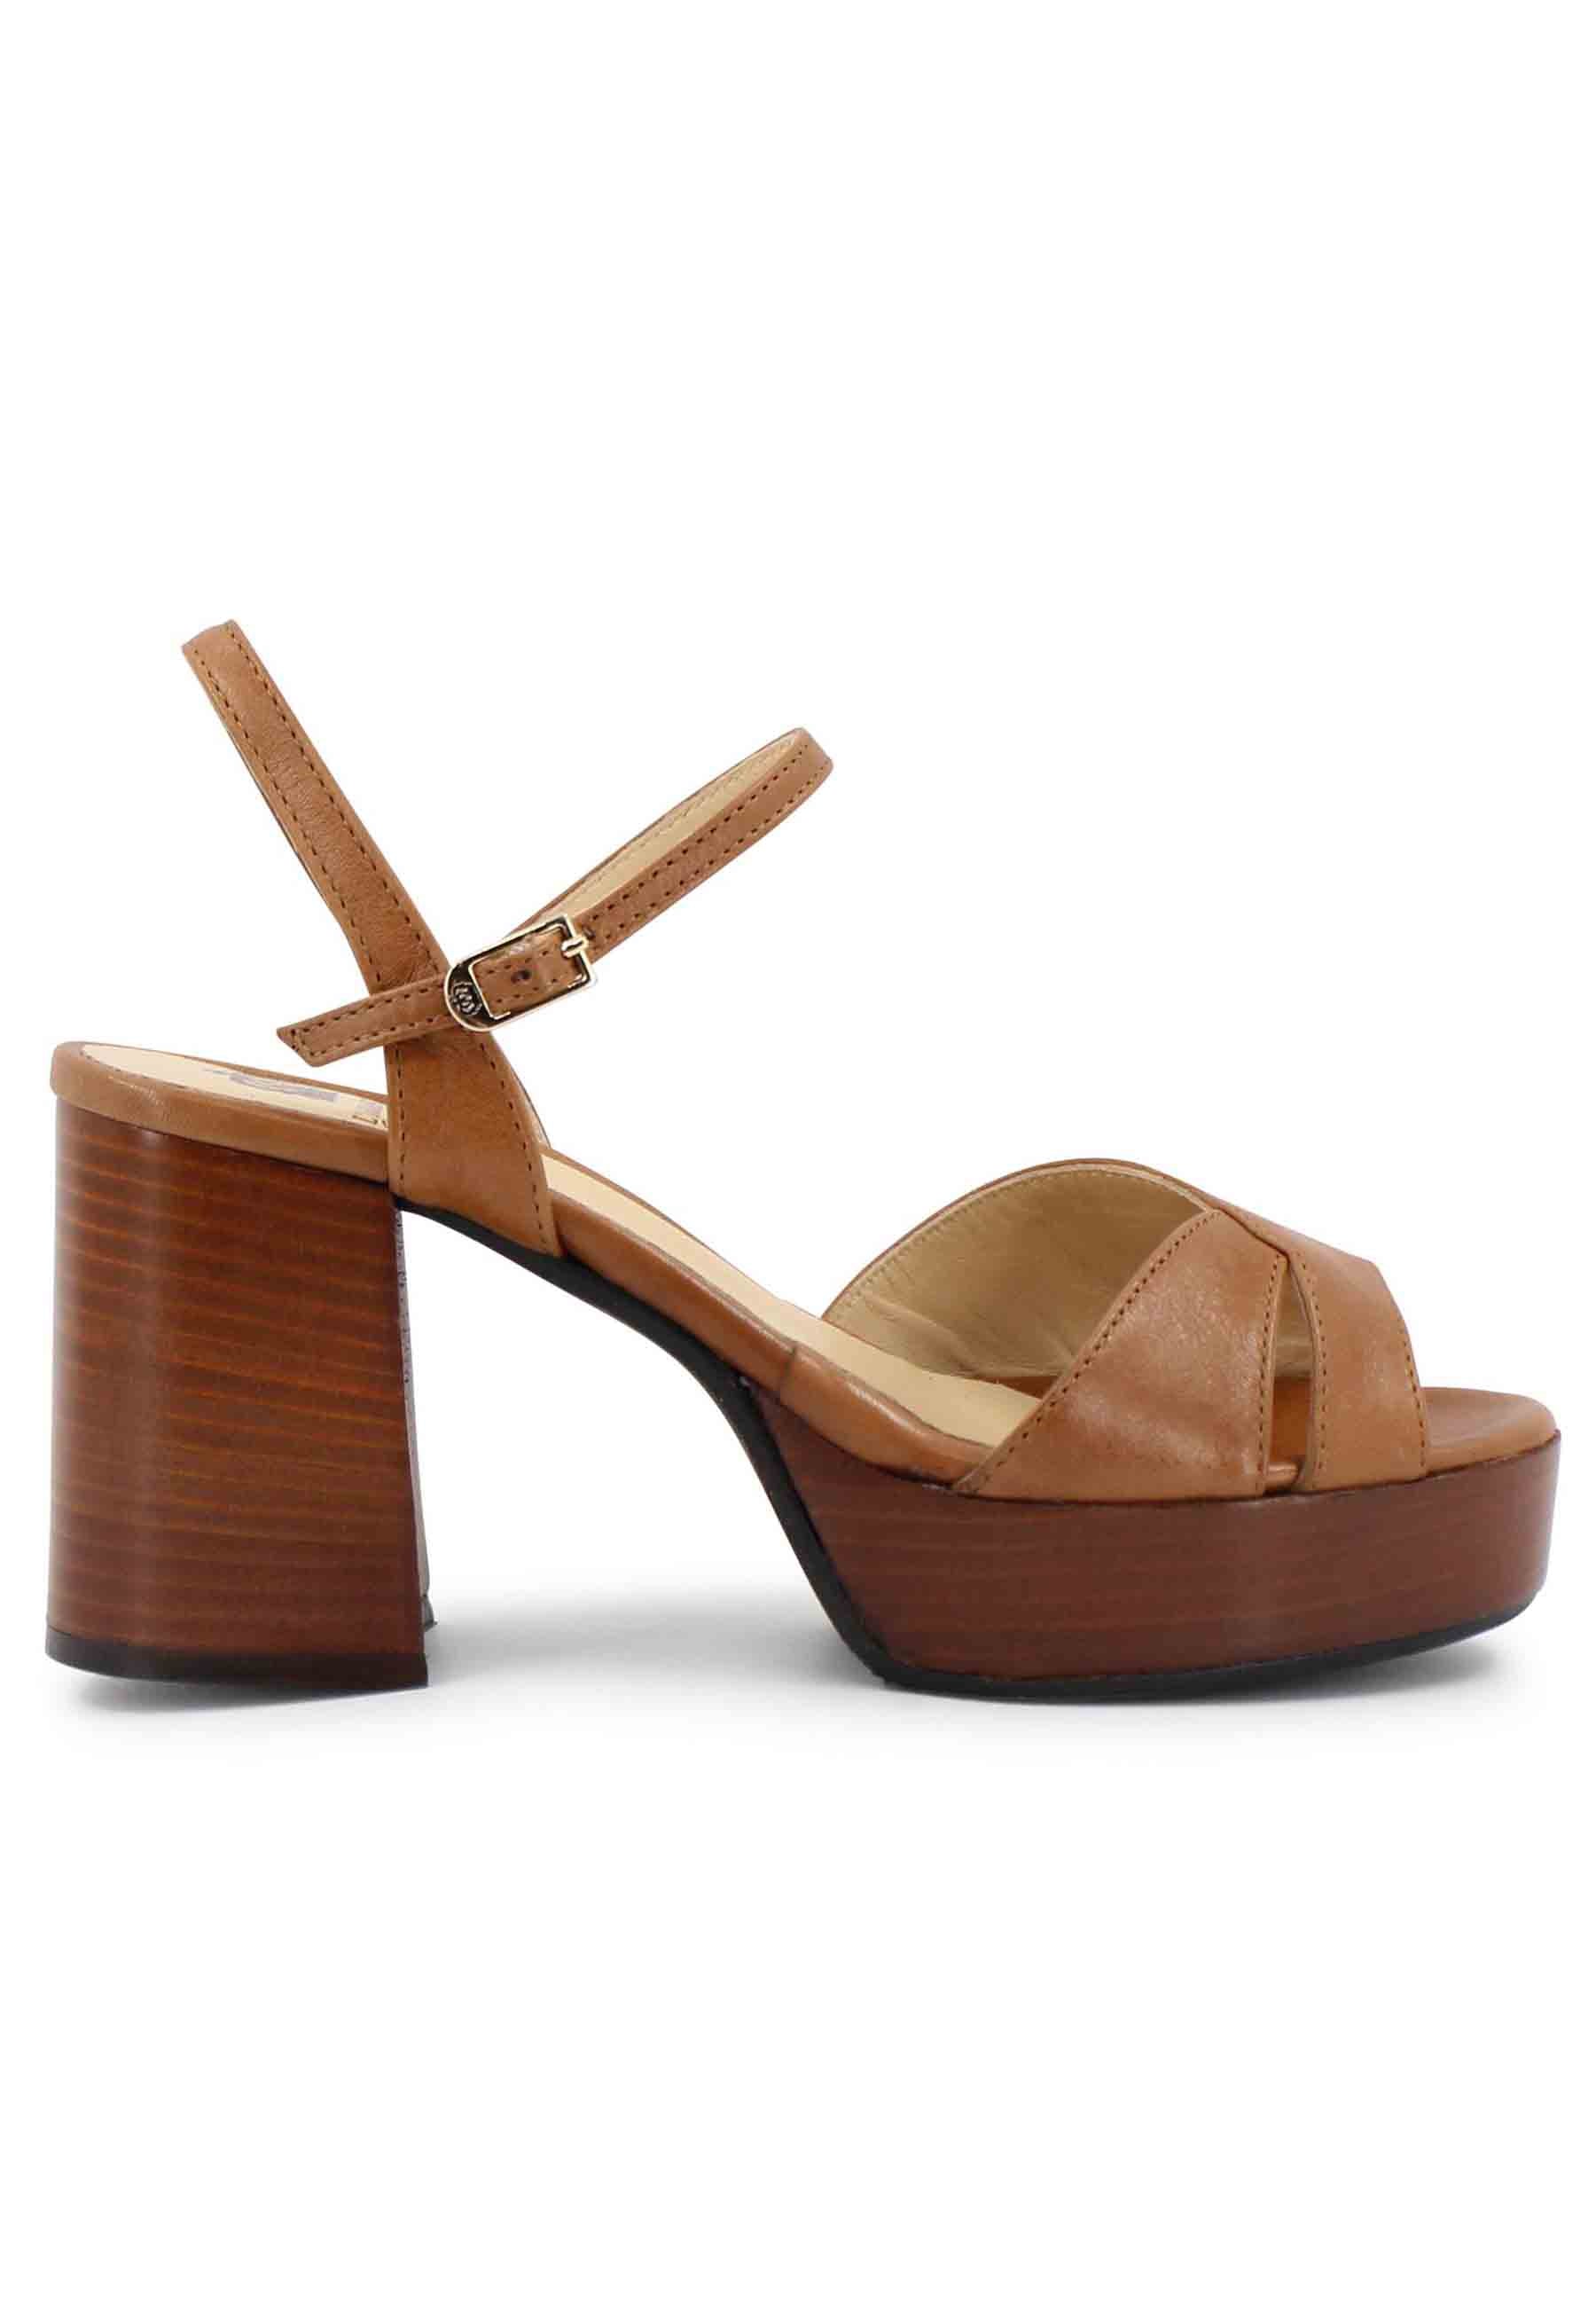 Women's sandals in tan leather with leather strap and heel and platform